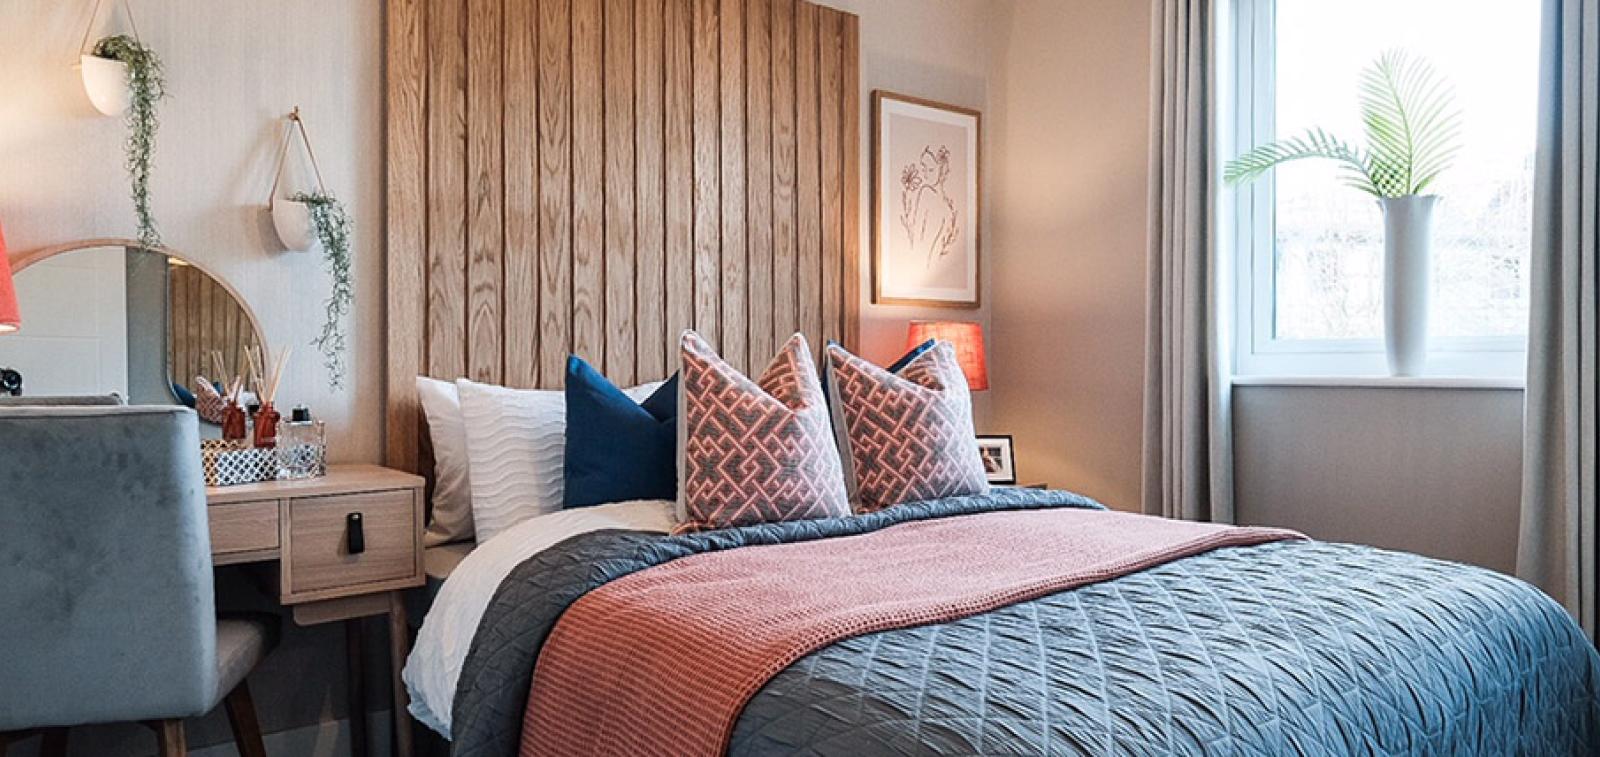 An example of an interior designed bedroom with floor to ceiling wooden slat headboard and pink and grey bedding.